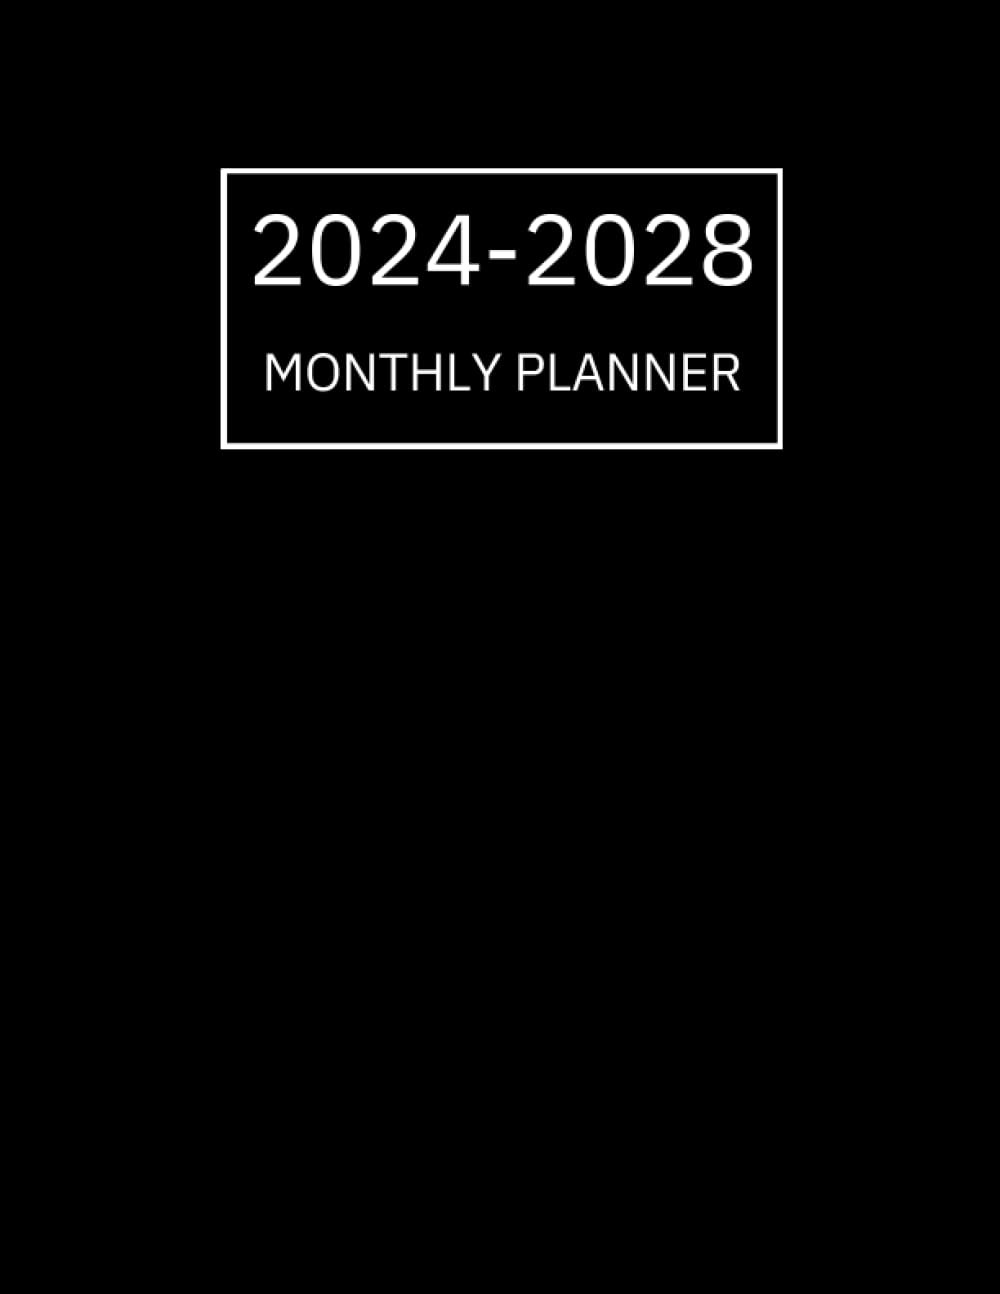 2024-2028 Monthly Planner: 5 Years Calendar from January 2024 to December 2028